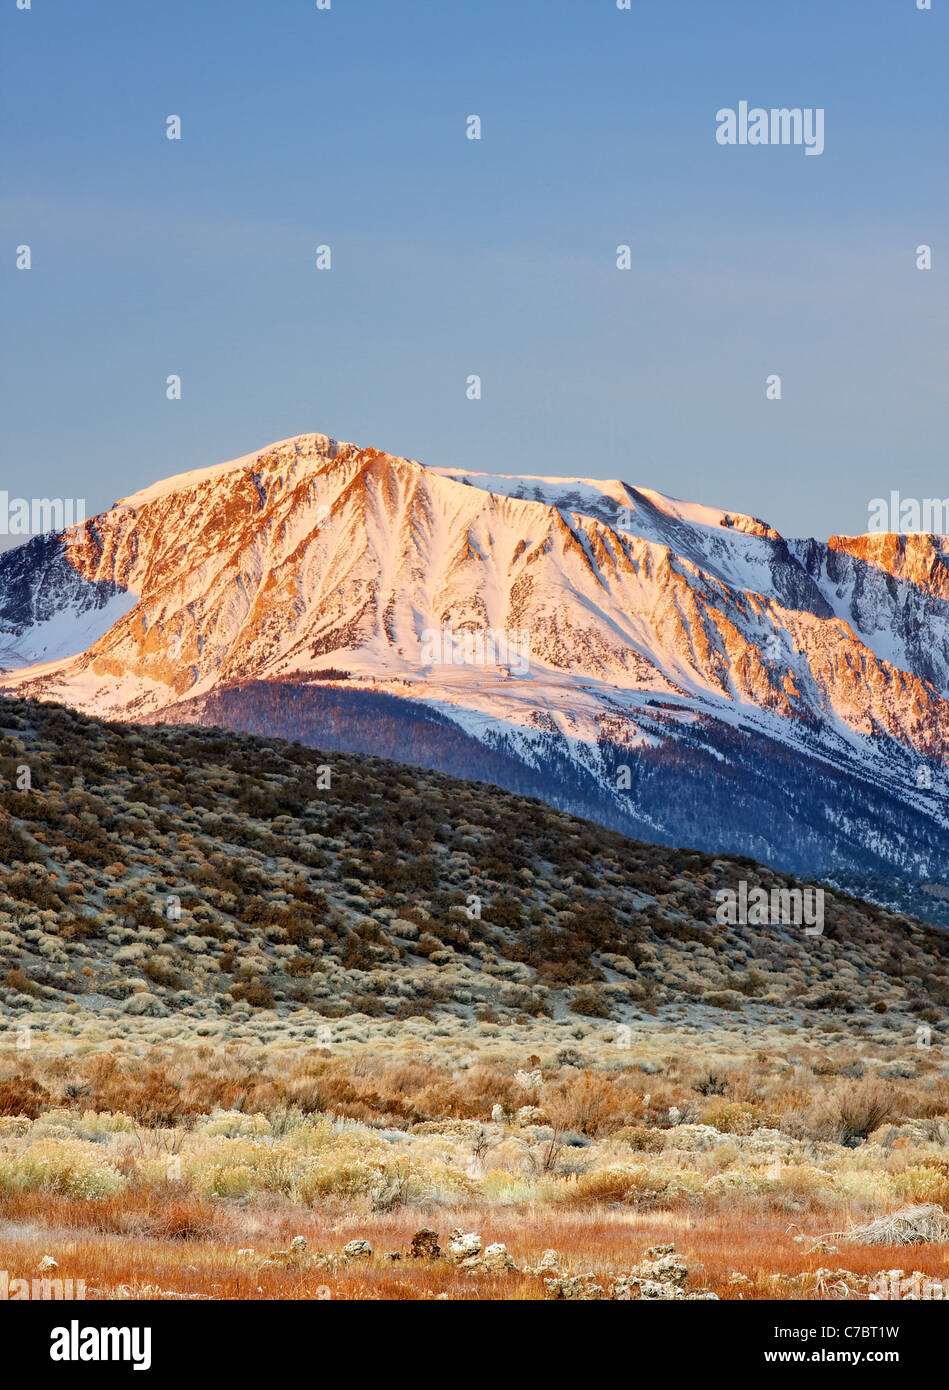 Snowy Northeast face of Mount Wood above desert sage brush, eastern Sierras, Mono Basin National Forest Scenic Area, California Stock Photo